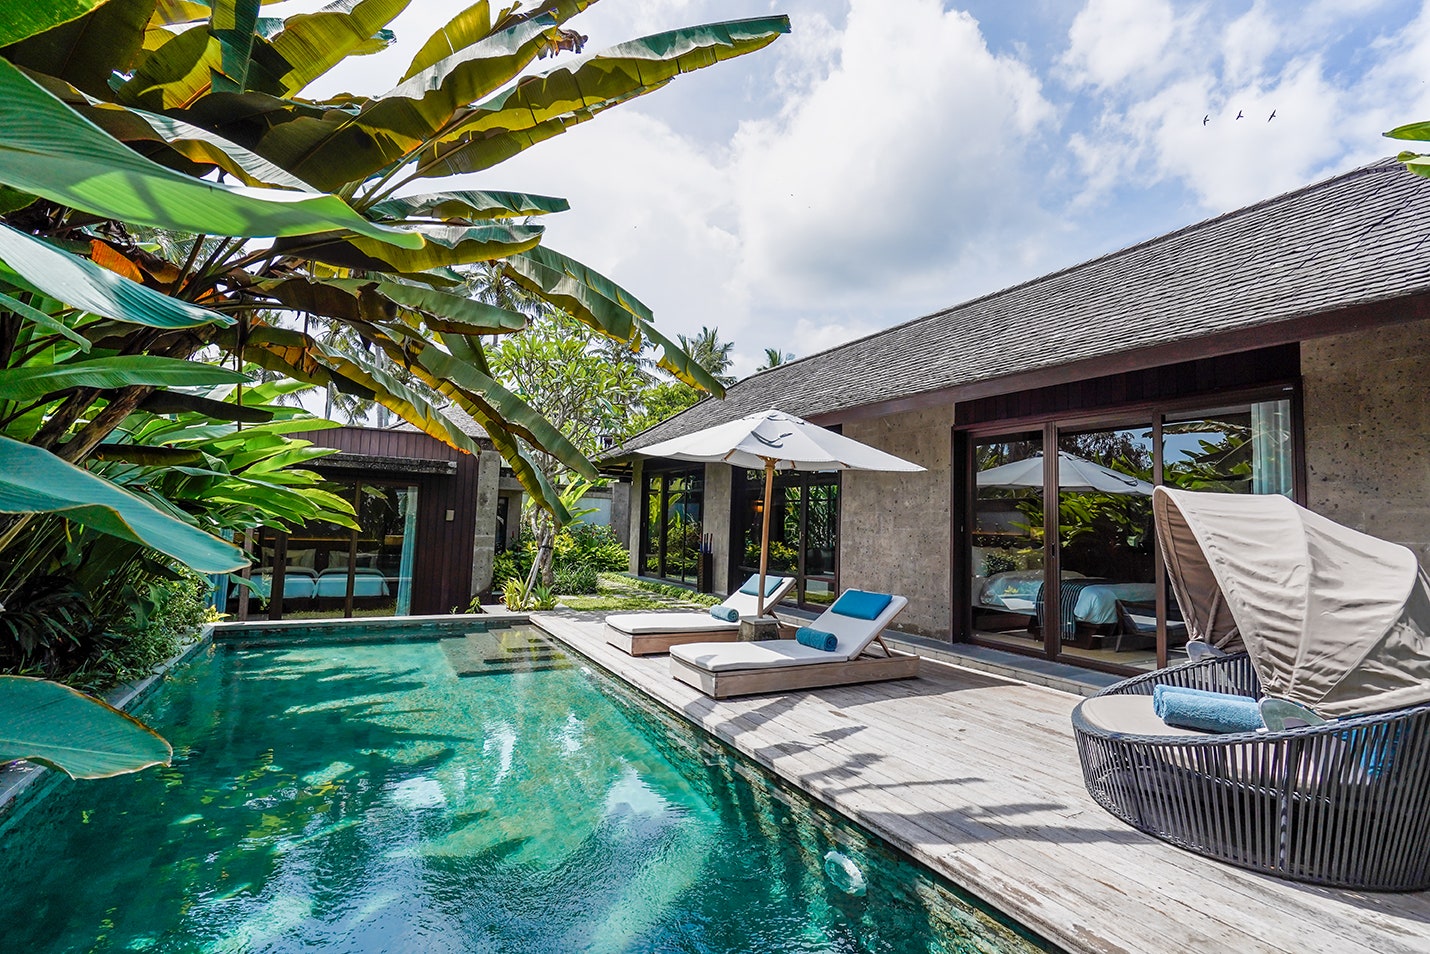 <p><strong>Tabanan</strong></p> <p>Tucked between the rice fields of Tabanan, a little-visited rural enclave on Bali's southwestern coast, Nirjhara feels like a hush-hush hideaway for the island's in-crowd. At the pool, overlooking the hotel's rambling waterfall, you'll find a stylish bunch of linen-clad expatriates, off-duty models, and high-society Indonesians on weekend jaunts from Jakarta. Between poolside sessions, they'll hop to the spa for flower baths or Ayurvedic marma-point massages, stop for yoga classes in the all-bamboo riverside shala, or venture out for trips to the nearby Tanah Lot temple on the complimentary guided bike rides. Nirjhara's lodgings—all straight lines, honey-hued woods, and Indonesian textiles—range from villas with balconies above the river to multi-bedroomed, private-pooled mansions with lush jungle views. If private pools are no priority, consider the Canopy Suites—these stilted tree houses surrounded by a palm grove come with brilliant rooftop decks overlooking the rice fields. And when Tabanan starts to feel a little too isolated, Canggu's buzzy bars and restaurants are just a short drive away.</p> <div class="callout"><p><a href="https://cna.st/affiliate-link/7EaqjGTiGVEZLzw7dtDbaNV19tv3GB292XQUmXXjBeZmXJw4YG2Bg8vEz9PqTk1F9jpiAc24qHdJBXmQSEeWGcNgYj3zXrh3YGQFtpEWNUPhM6RvZ2Te2ePf47aSP155n2NhN87RaqbkYNgJDHKHS" rel="sponsored" title="Book now with Booking.com">Book now with Booking.com</a></p> <p><a href="https://cna.st/affiliate-link/2FTC5bHweKNXngBbWiRH7D5k3FvfWq6GyqH7sx2FXQvGUXwuoGtsV9KTpxMRrYfG5HfHLU8cpJkYykuqvKgXQFmD4NDZZX43oRKsqcyWB52KHomgKxSjy2HFmBygkXgvoJJR6JwSoueToeUE7gpNjTCJjKLtM18mSJbgv2A99ThsRQsZKJoKDskfXfyrQ" rel="sponsored" title="Book now with Expedia">Book now with Expedia</a></p> </div><p>Sign up to receive the latest news, expert tips, and inspiration on all things travel.</p><a href="https://www.cntraveler.com/newsletter/the-daily?sourceCode=msnsend">Inspire Me</a>